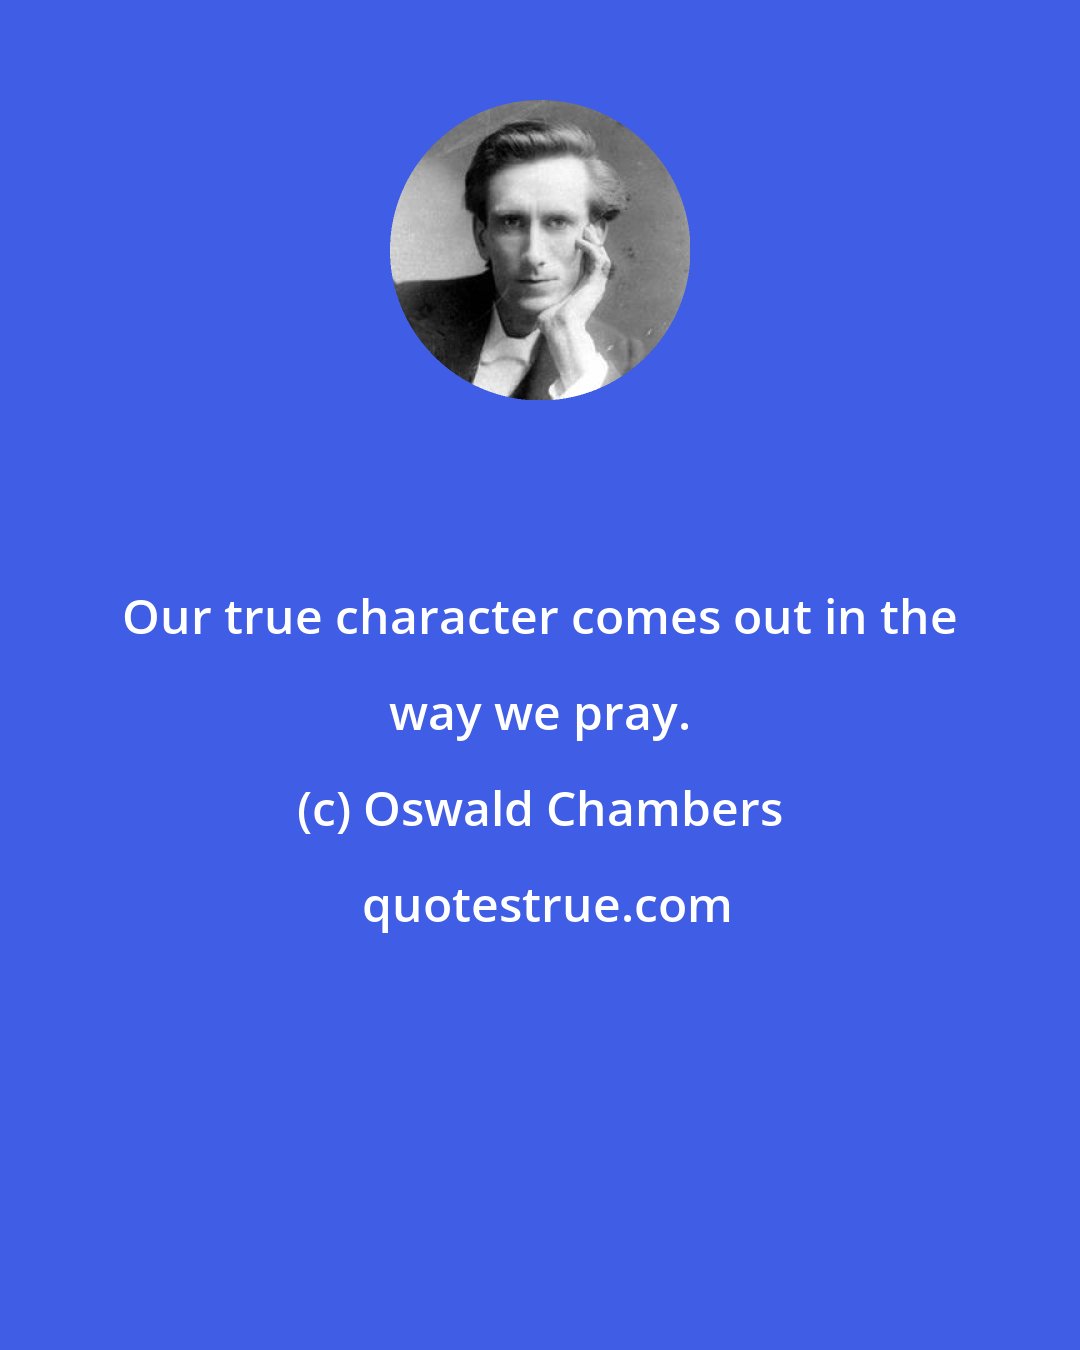 Oswald Chambers: Our true character comes out in the way we pray.